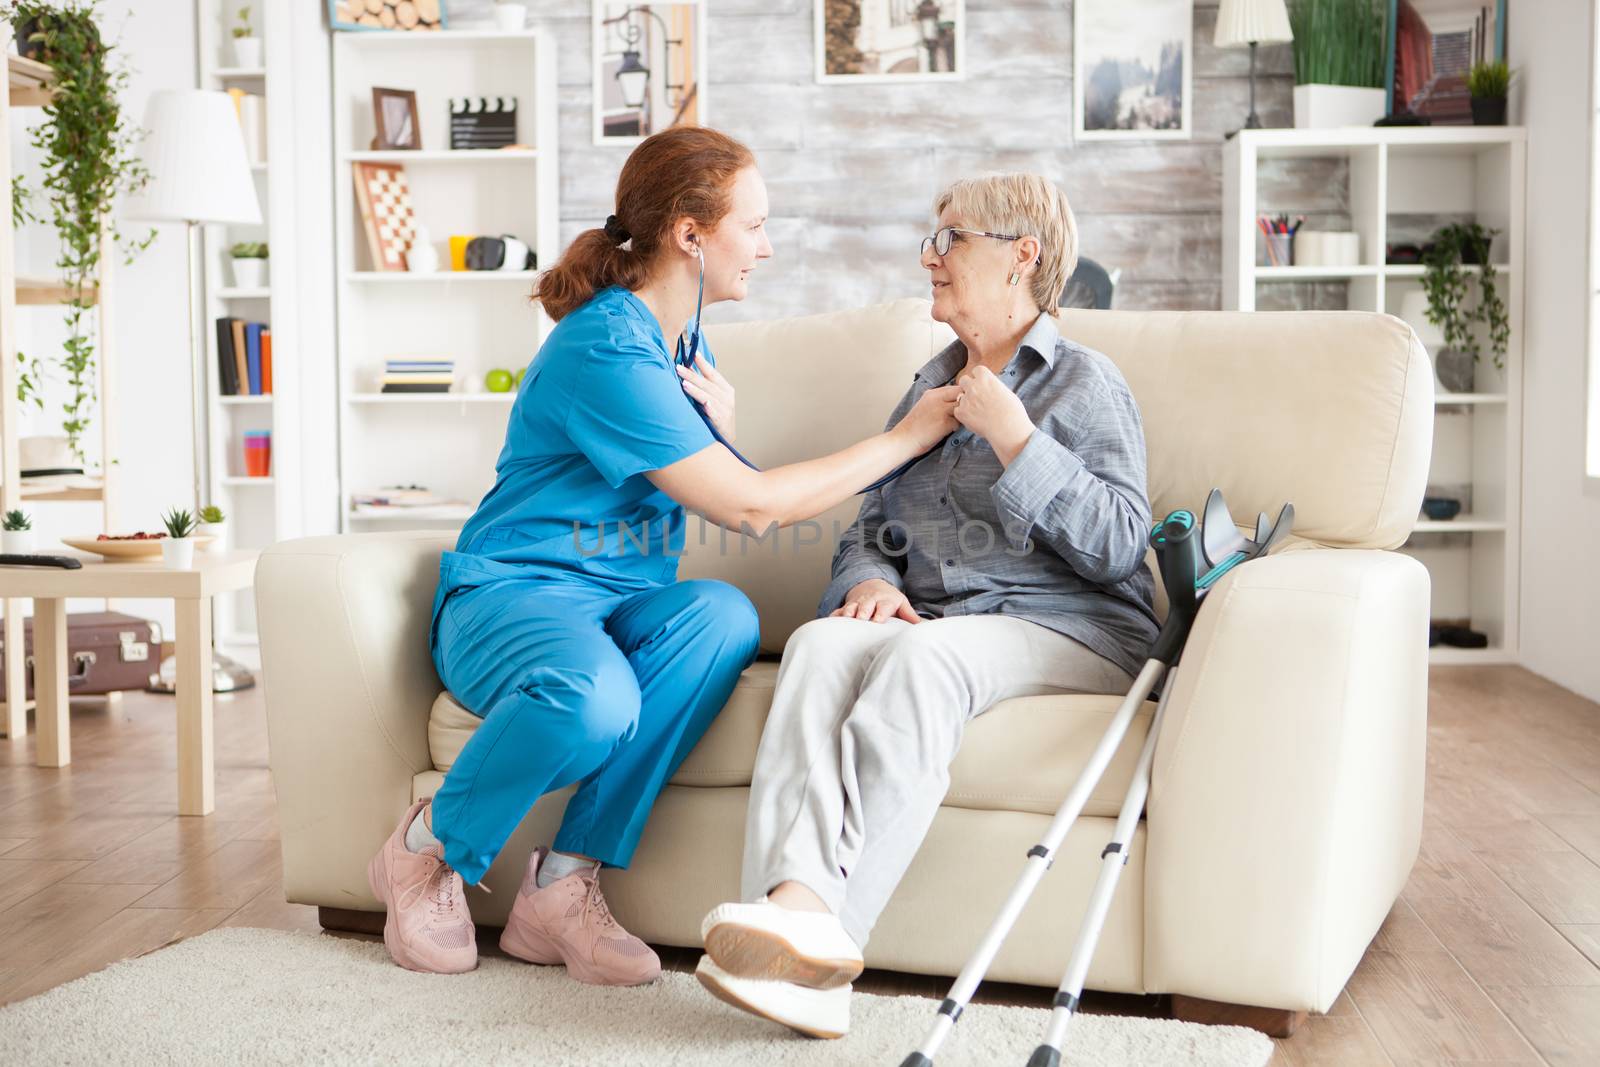 Female nurse sitting on couch with old woman in nursing home using stethoscope to listen her heartbeat.